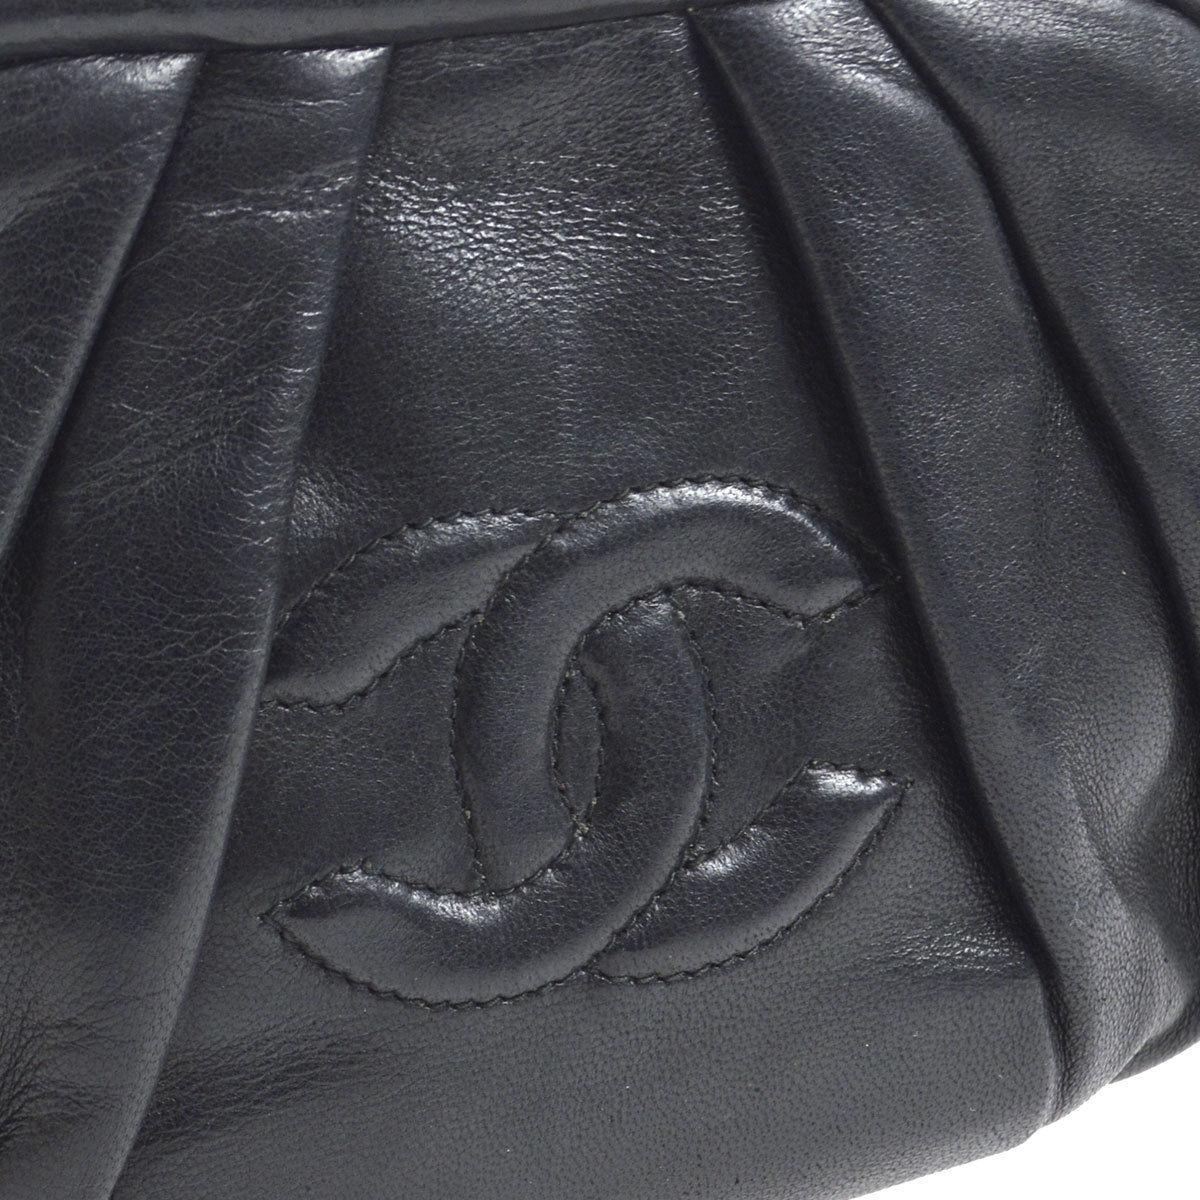 Chanel Black Leather Gold Kiss Lock Evening Small Mini Party Shoulder Bag

Leather
Gold tone hardware
Leather lining
Date code present
Made in Italy
Shoulder strap drop 19